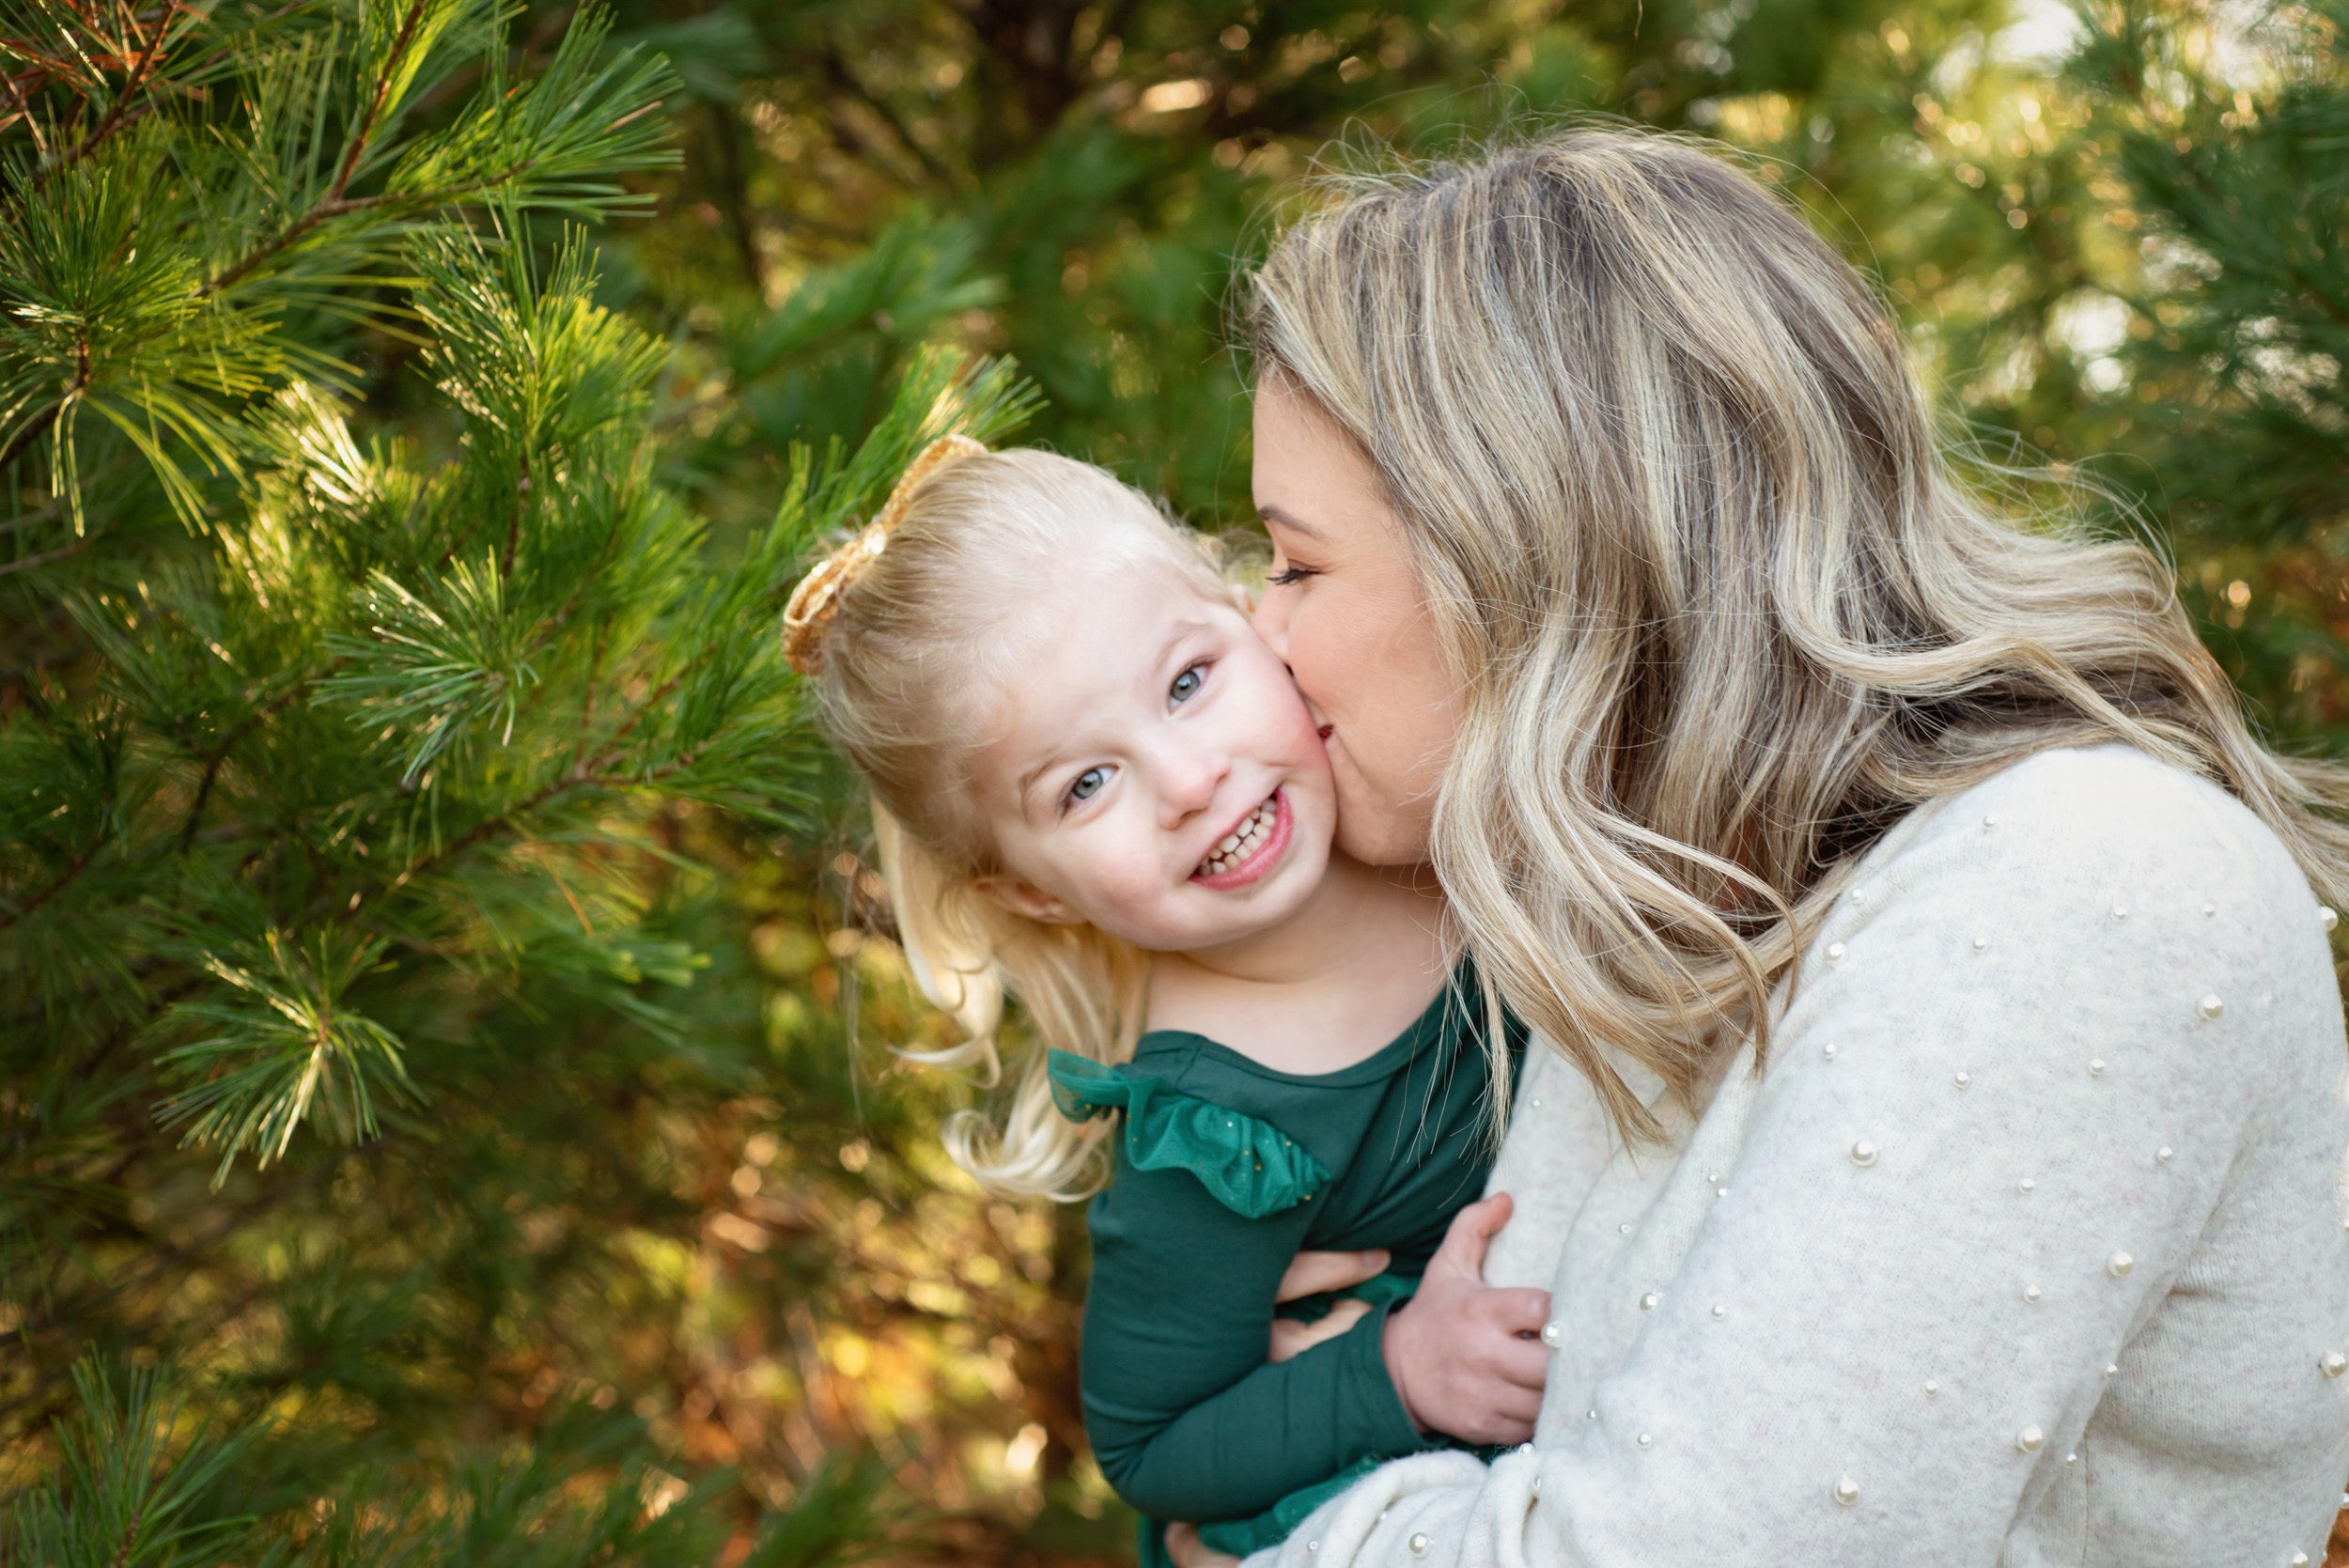 A young girl smiling at the camera while her mom kisses her cheek at a Christmas Tree Farm during a family photo session